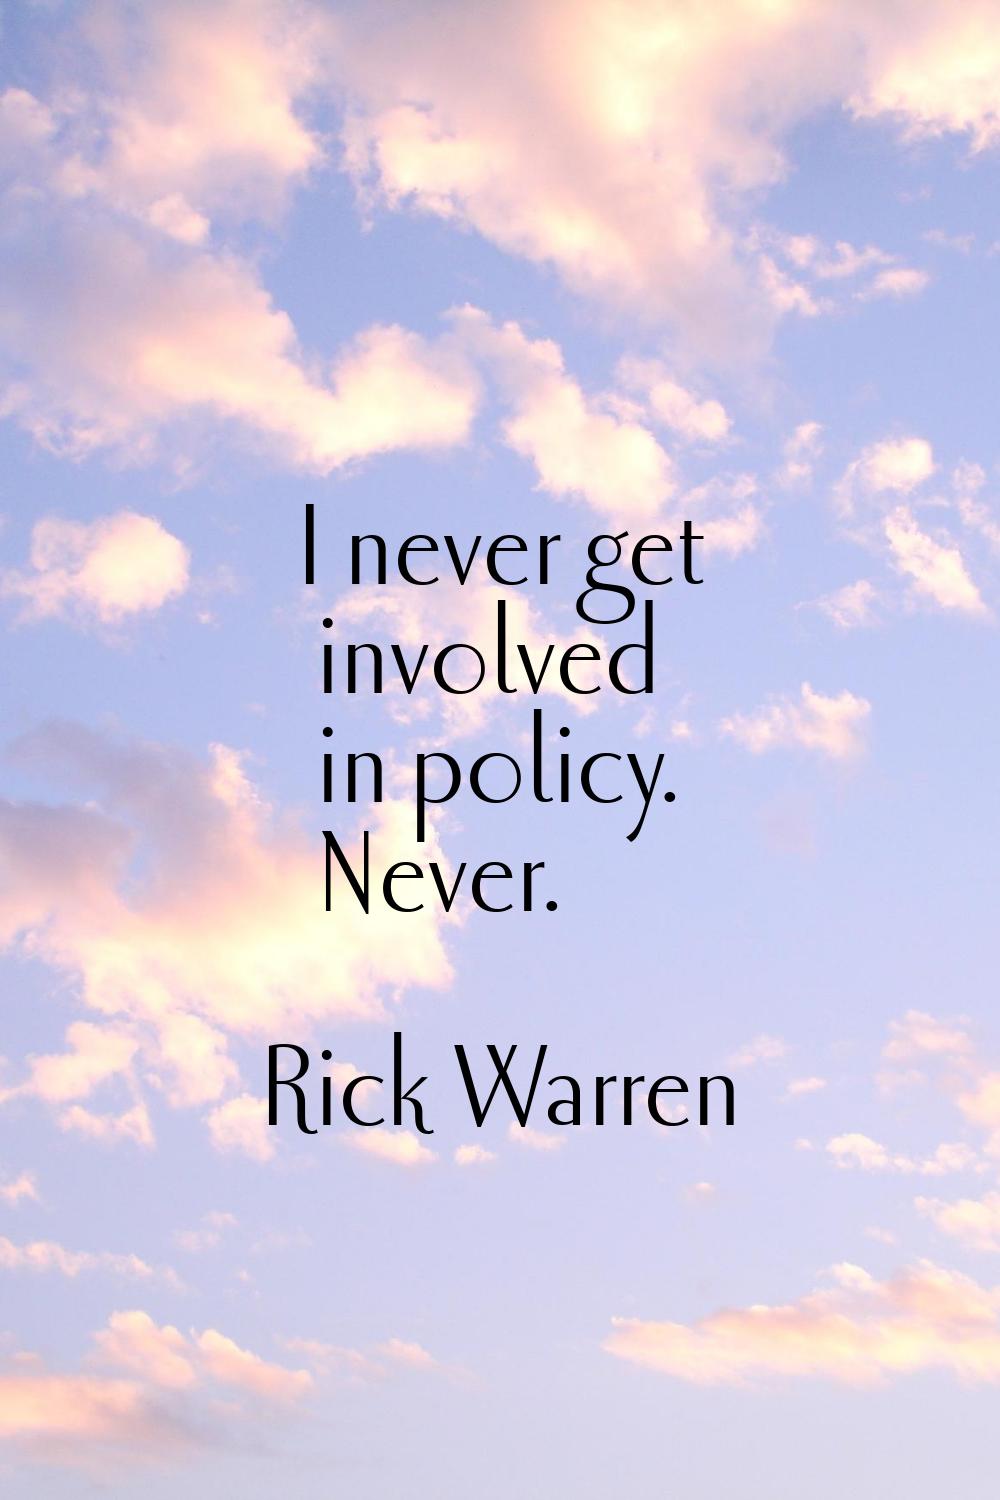 I never get involved in policy. Never.